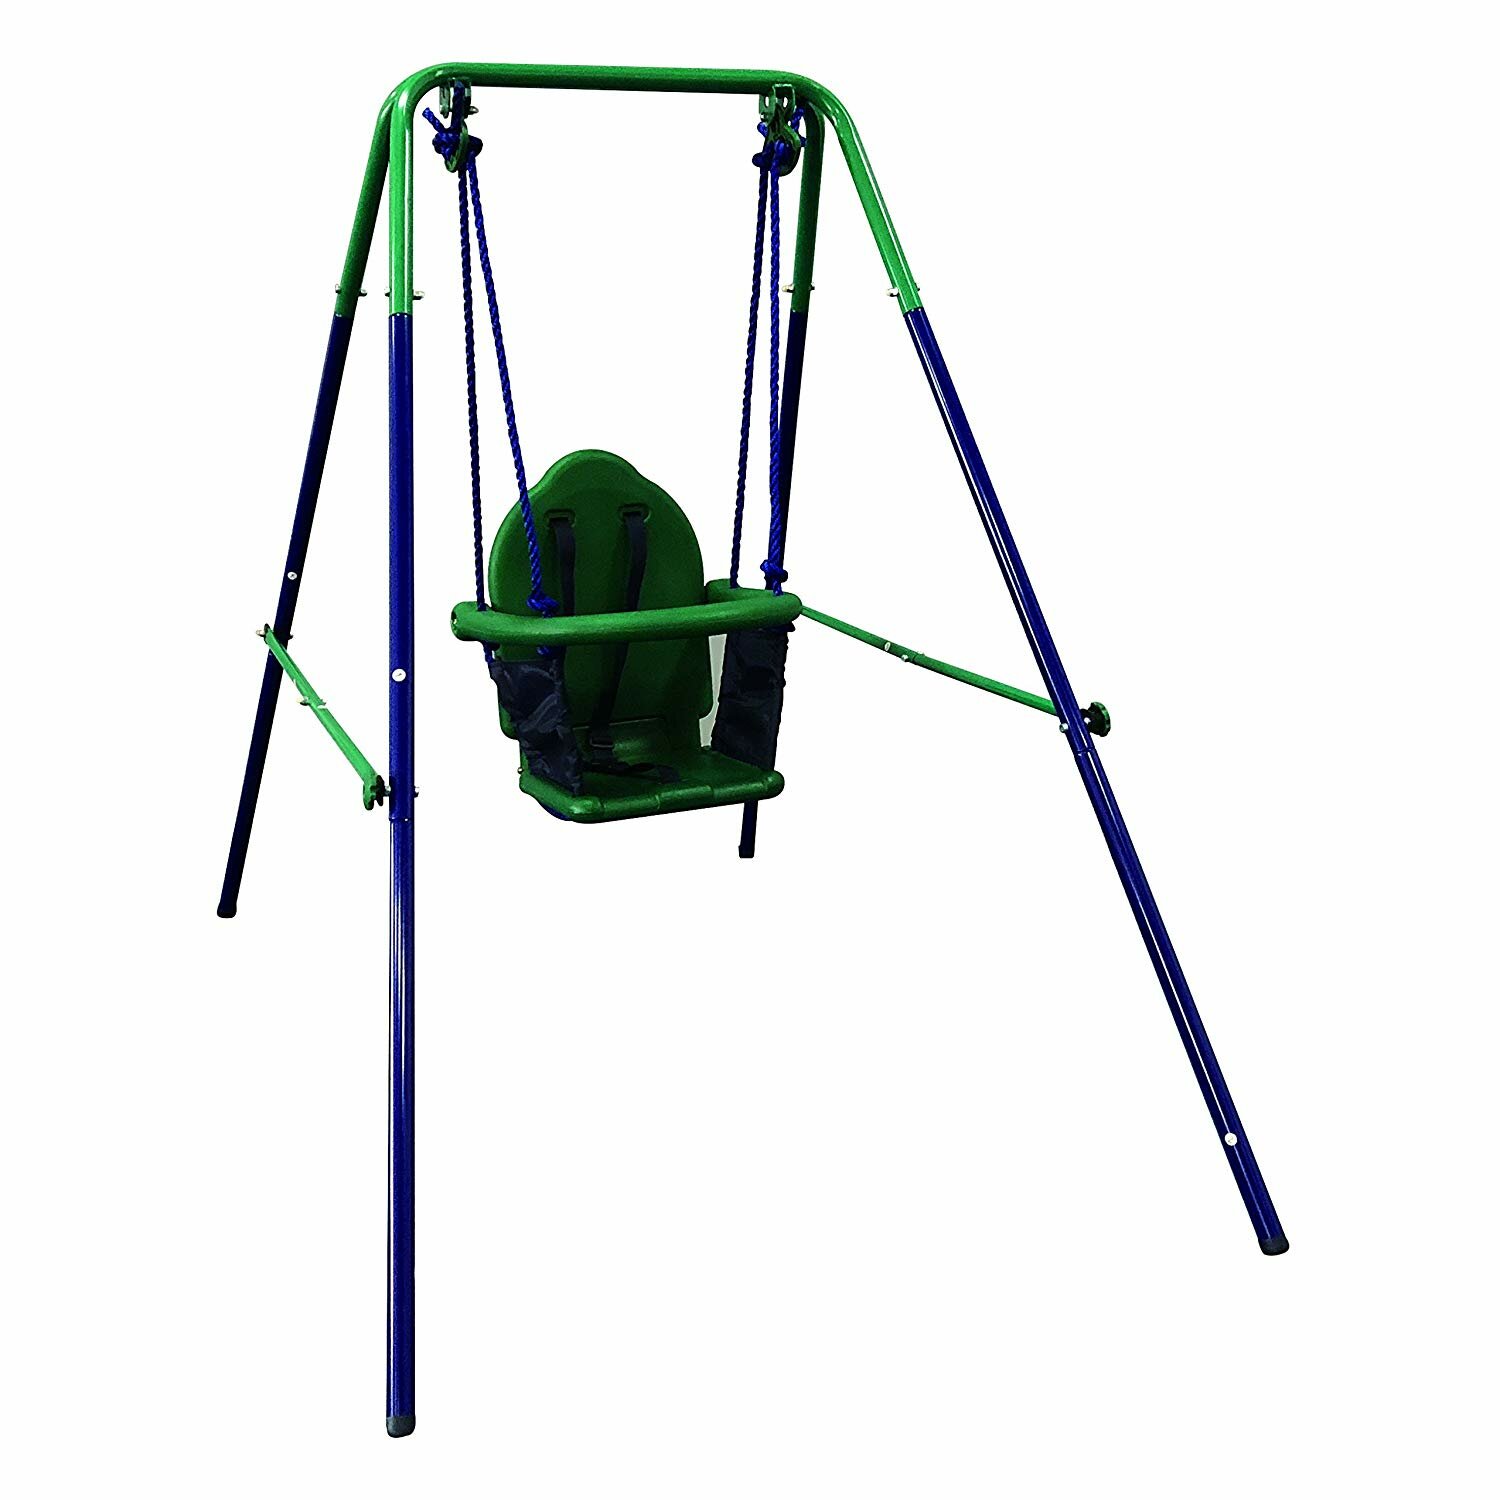 Handley-1 Toddler Swing Seat,3-in-1 Swing Seat Infants to Teens Indoor Outdoor Swing Seat with Safety Harness 